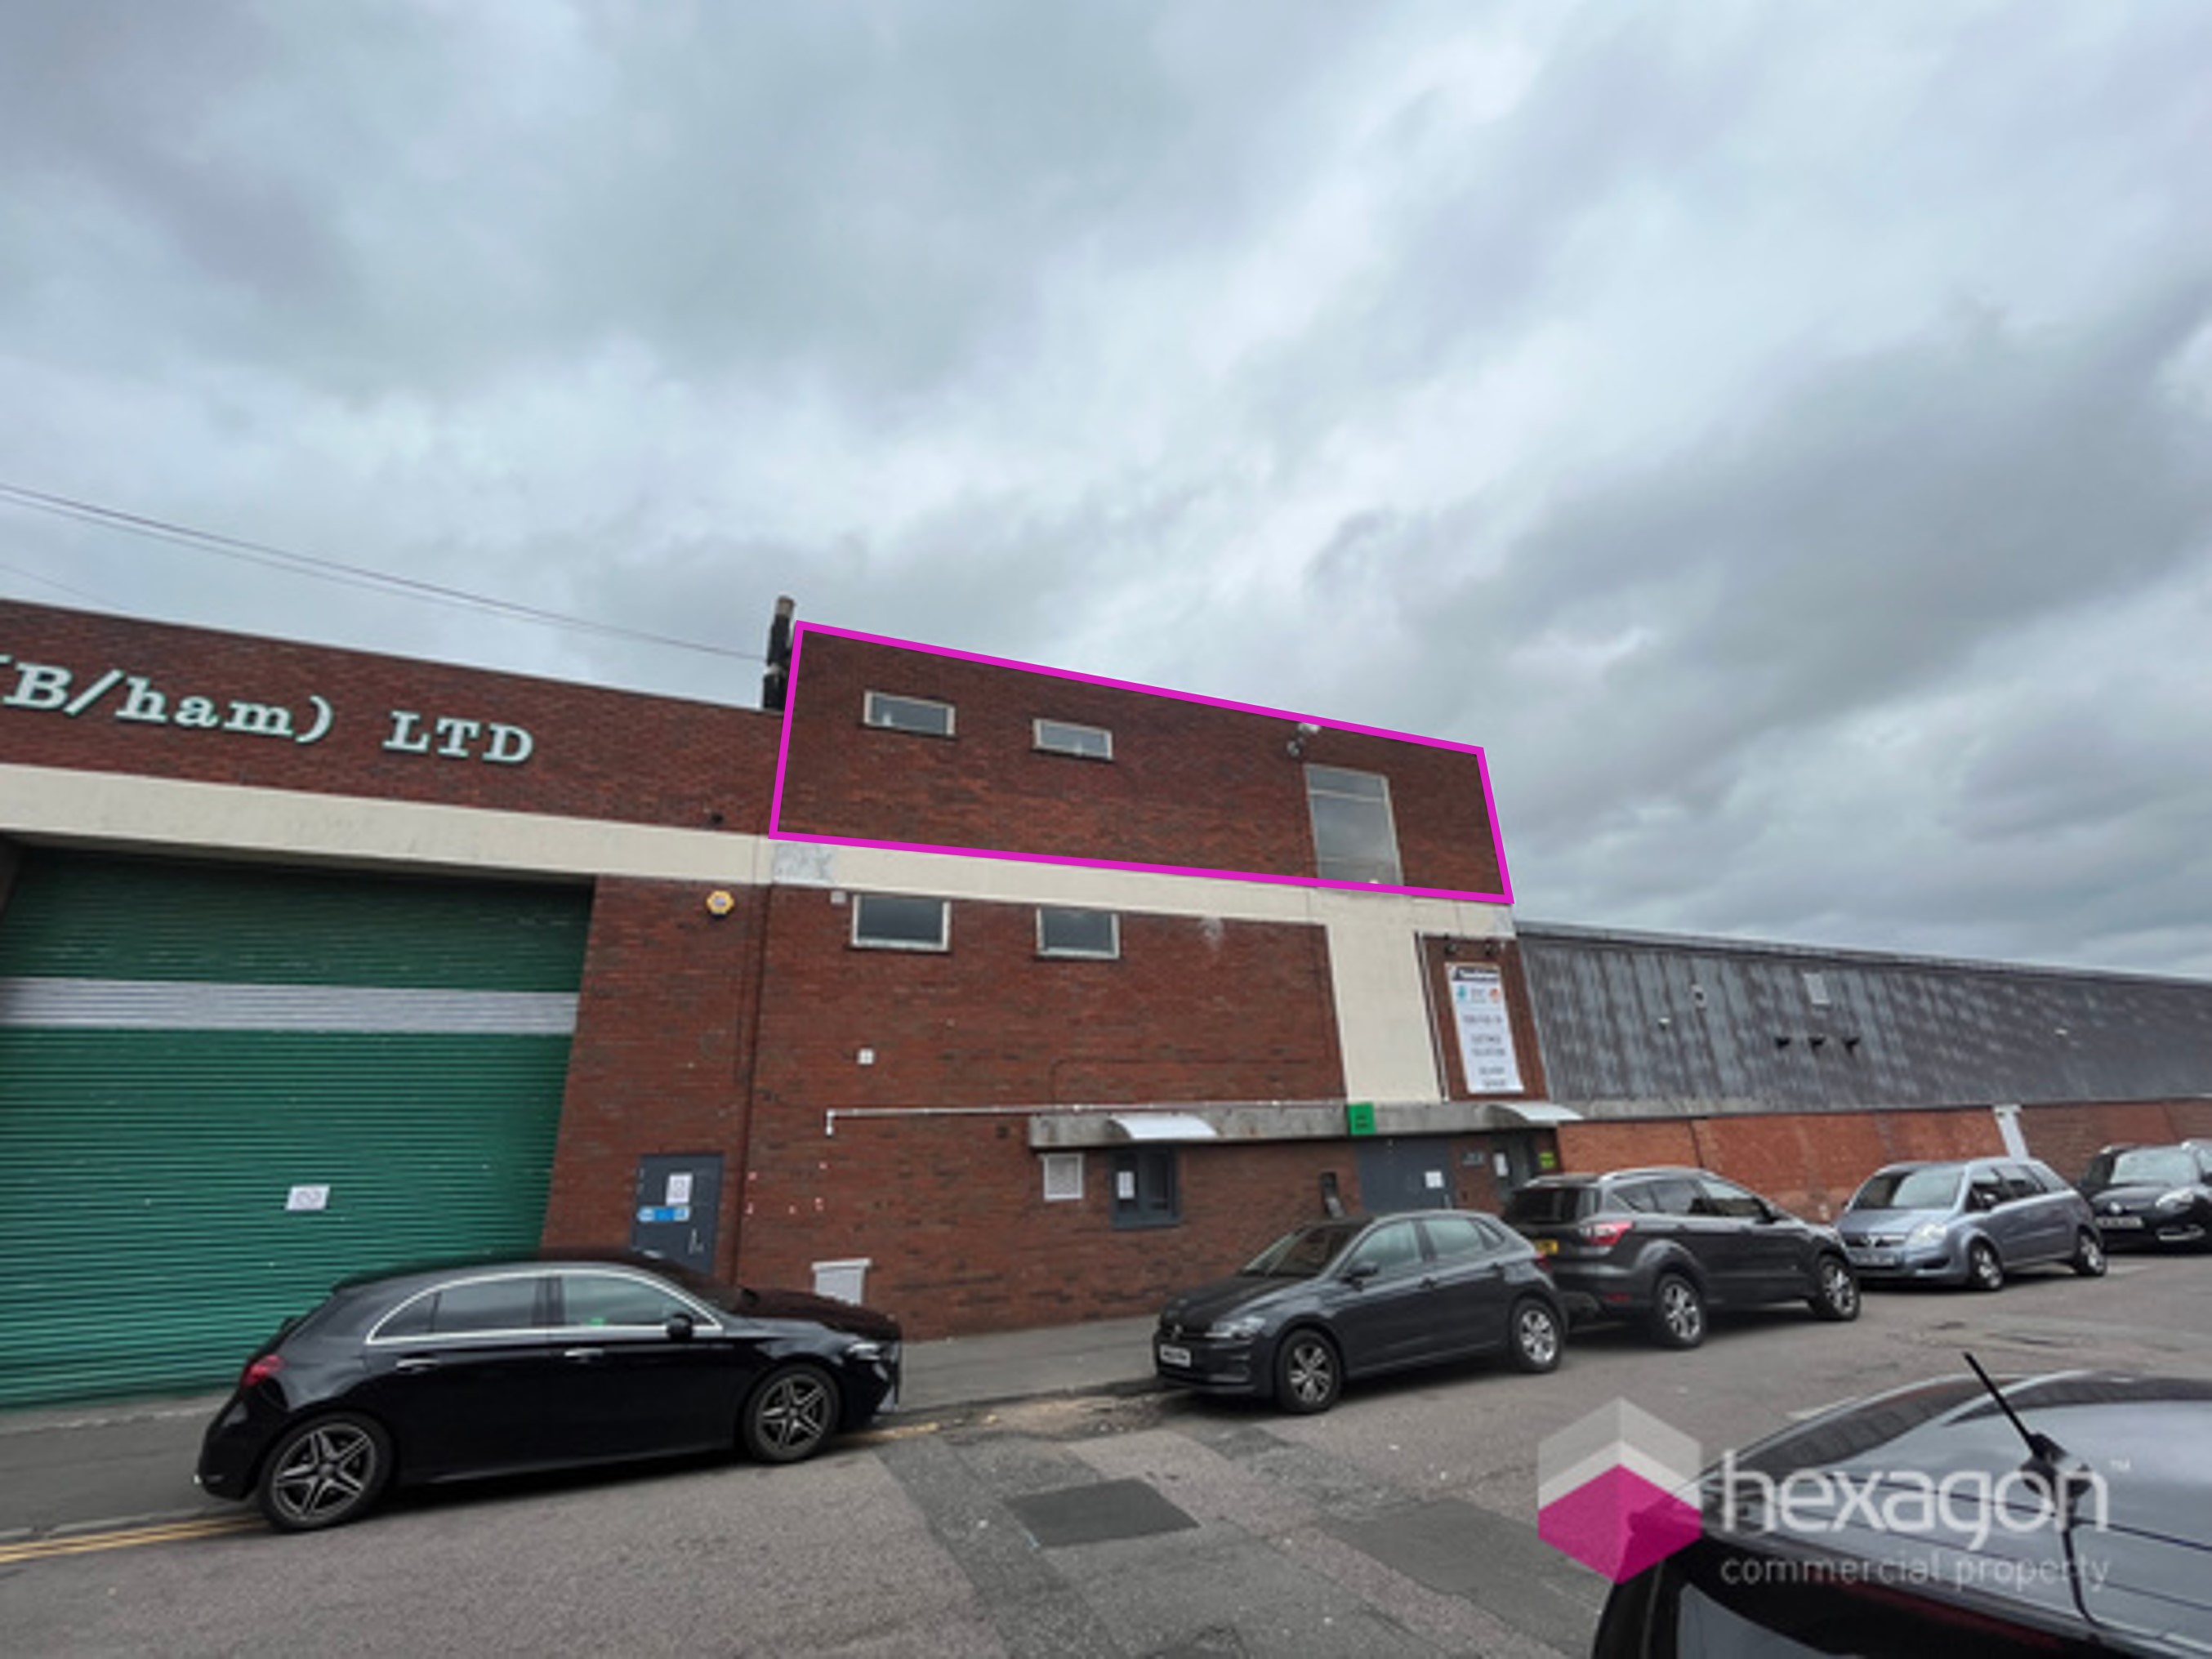 0 bed Retail Property (High Street) for rent in Birmingham. From Hexagon Commercial Property